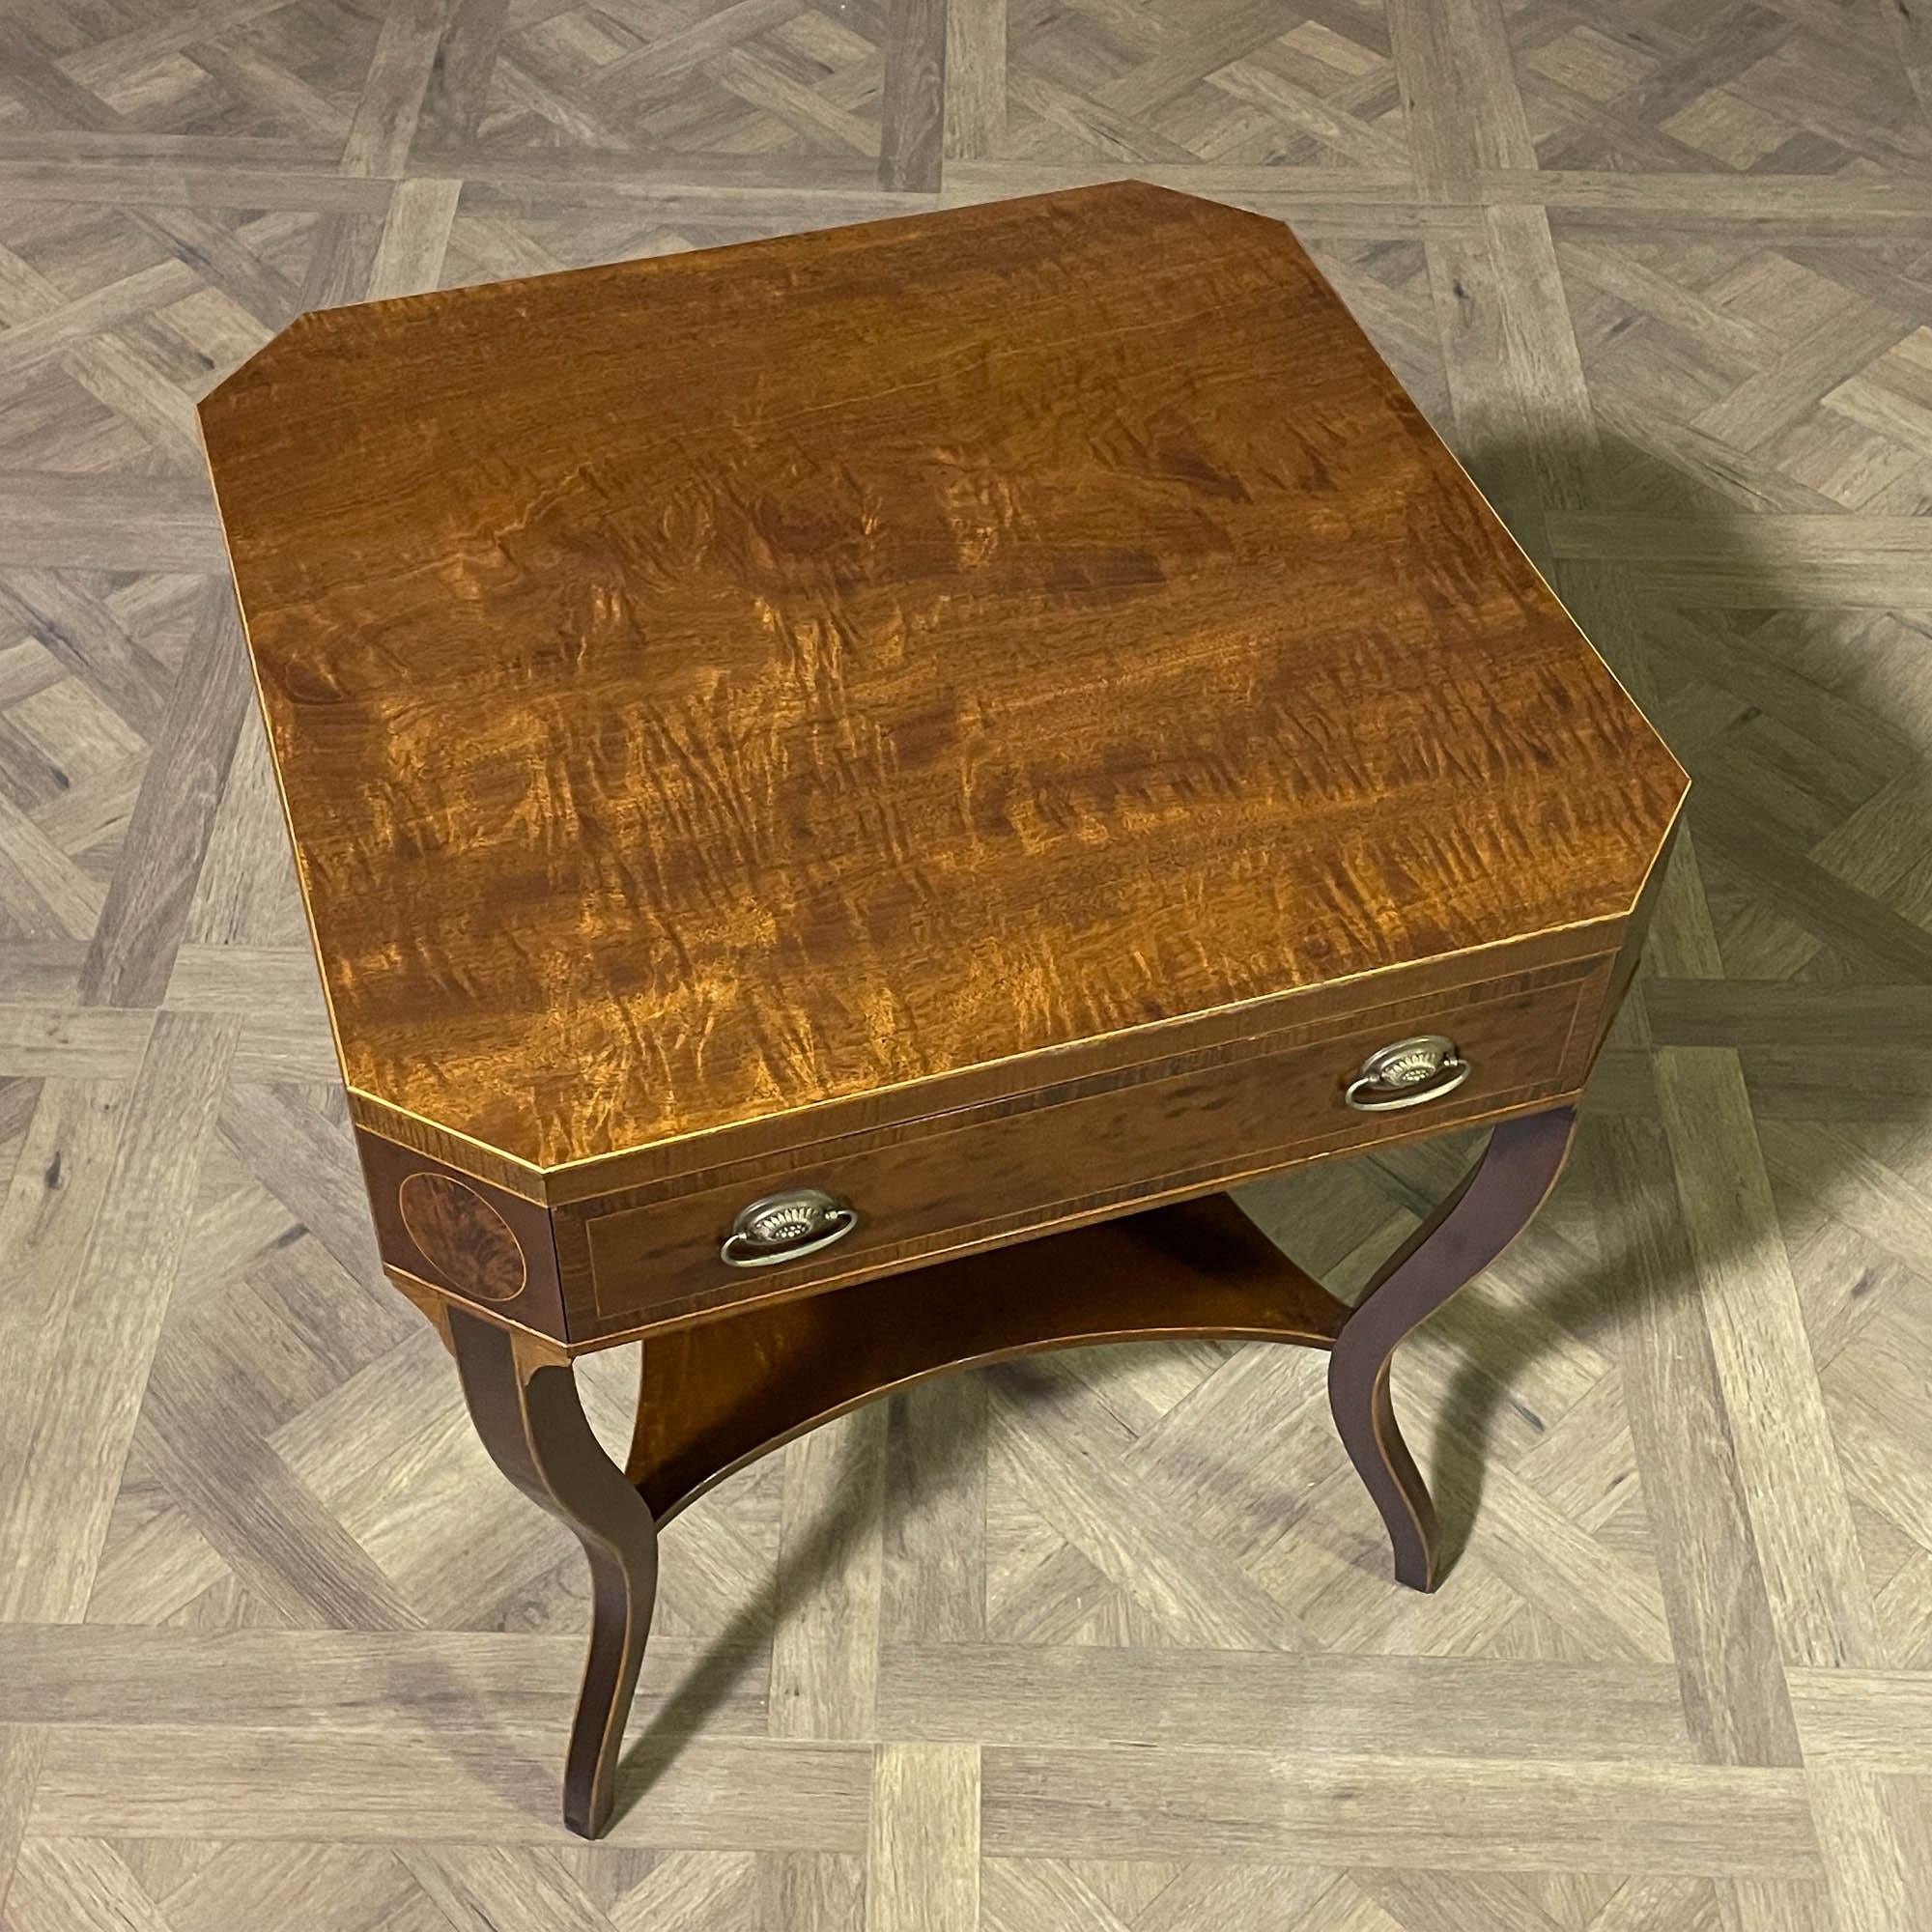 Vintage Schmieg and Kotzian End Table In Good Condition For Sale In Annville, PA